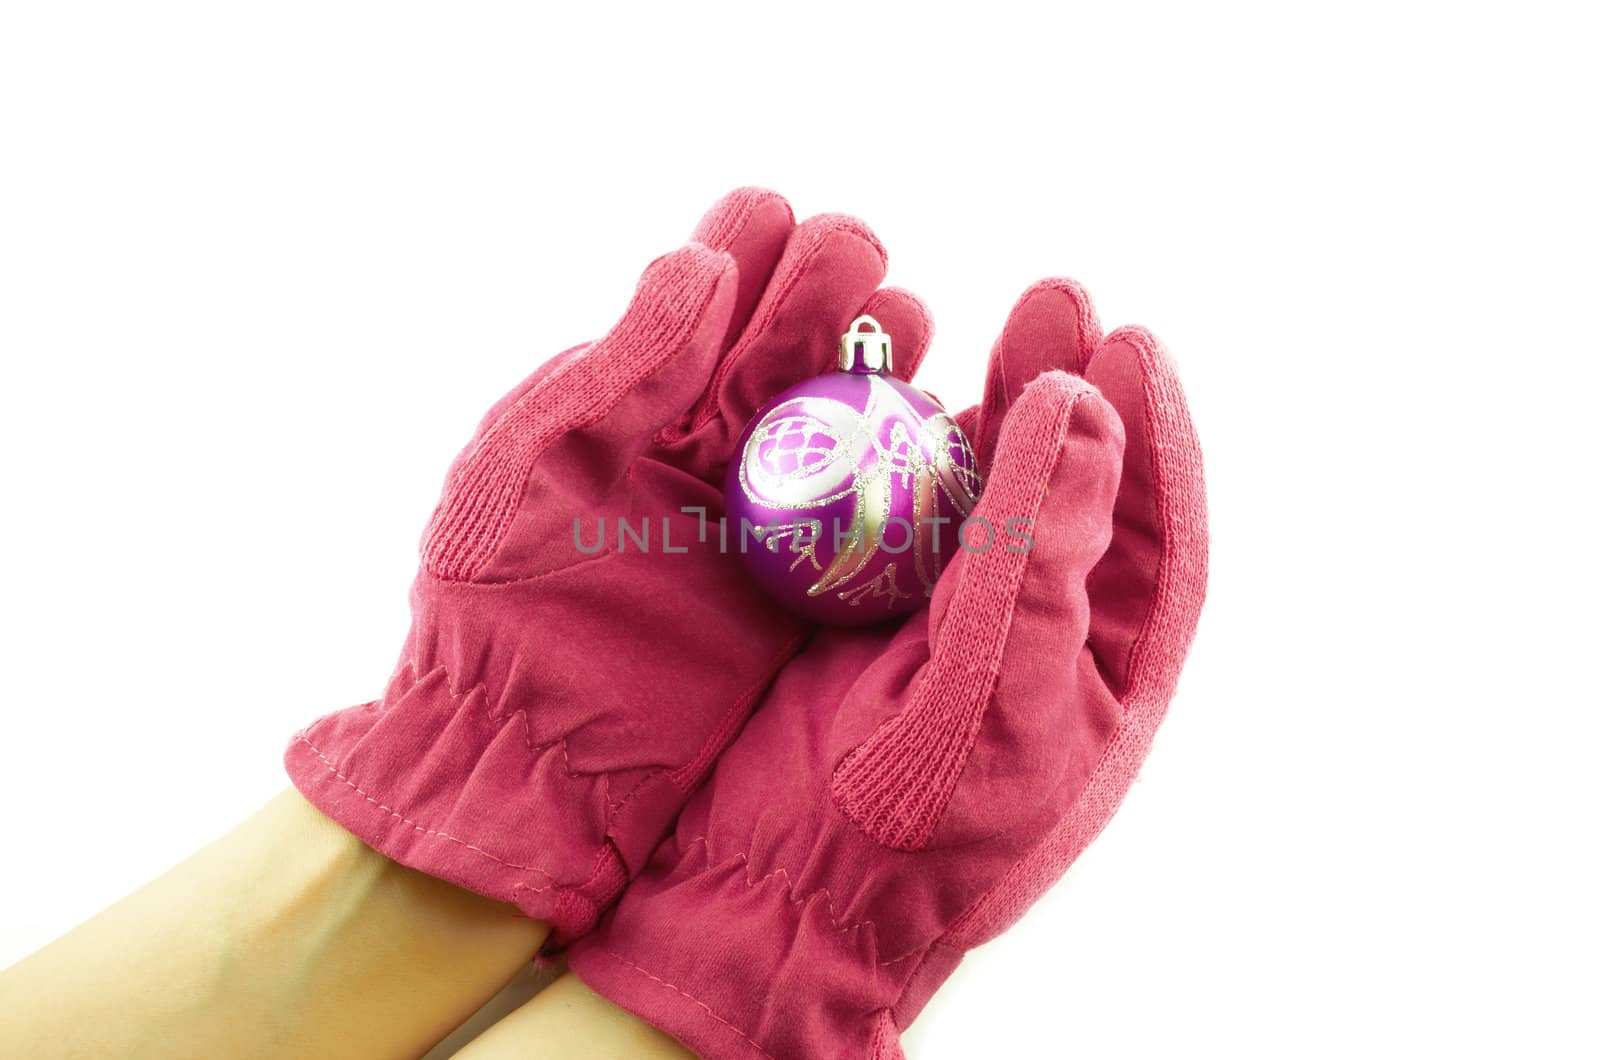 Gloves by subos